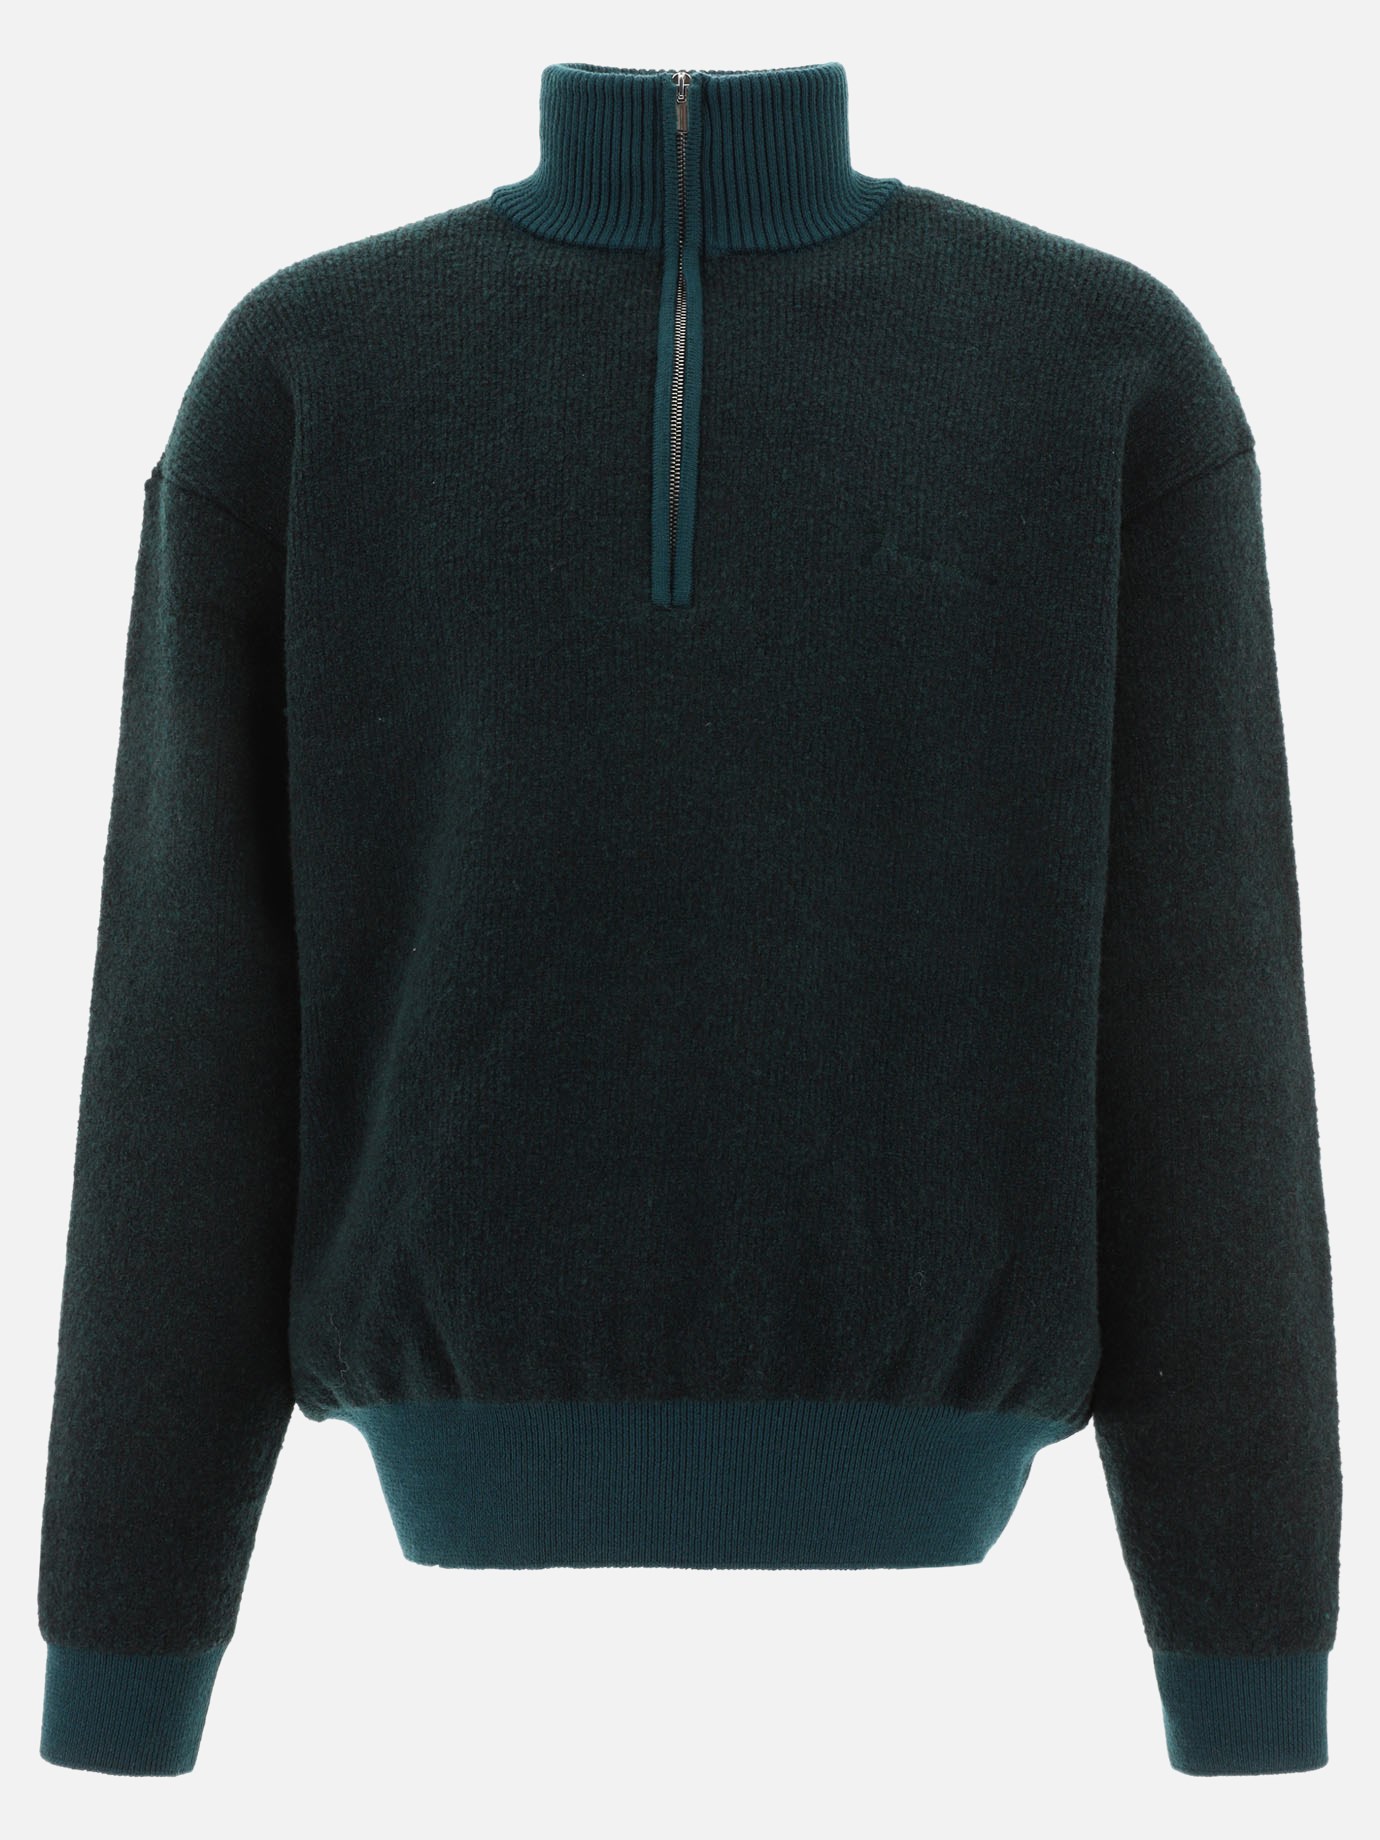 Maglione  La Maille Berger by Jacquemus - 1